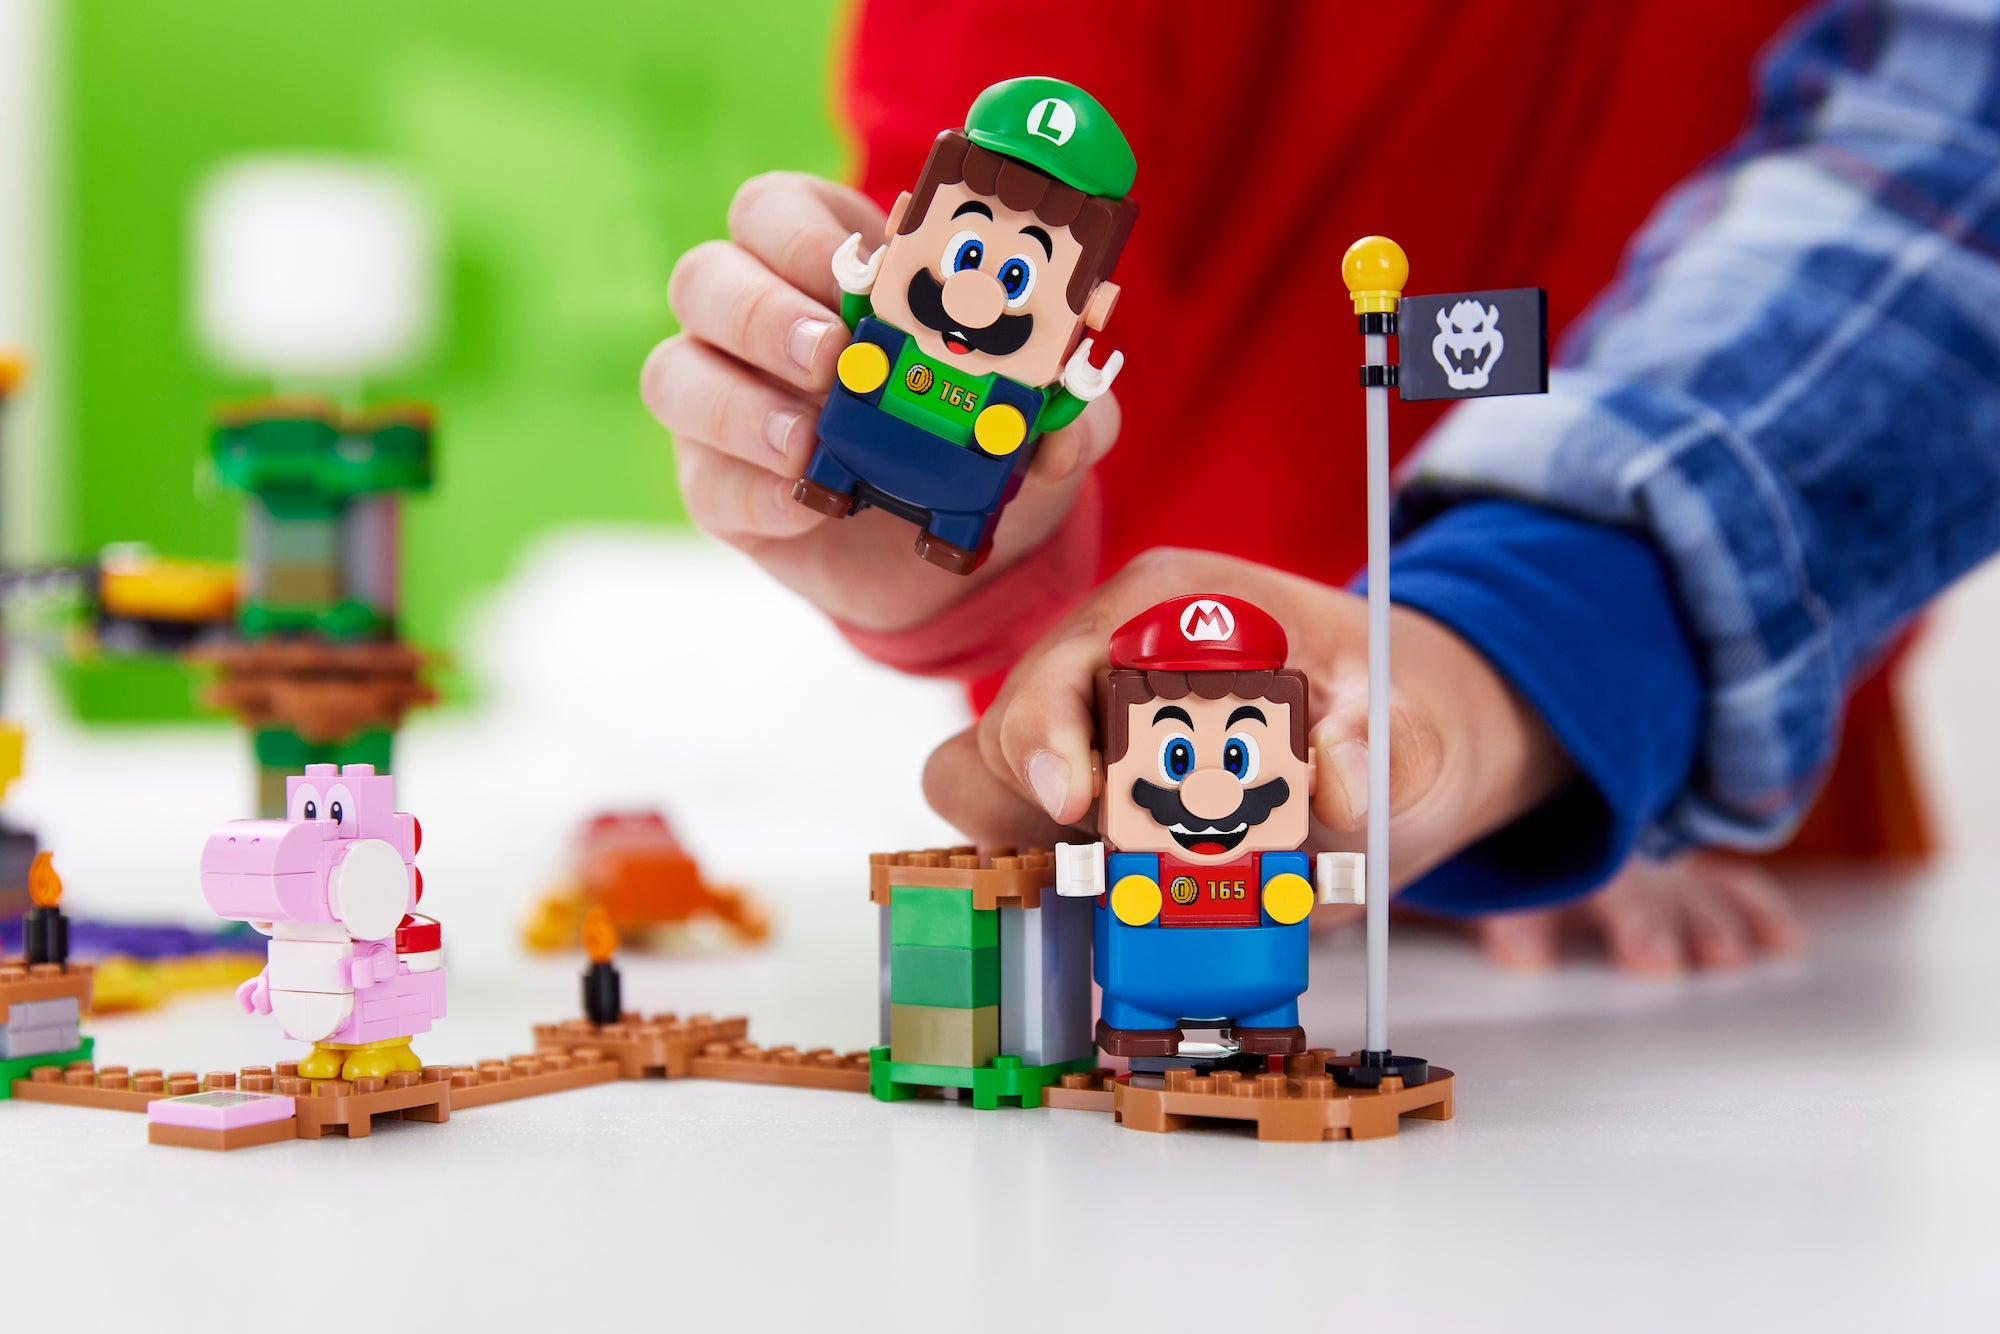 Image for Adding Luigi and multiplayer, Lego Mario finally feels like it’s reaching its true potential